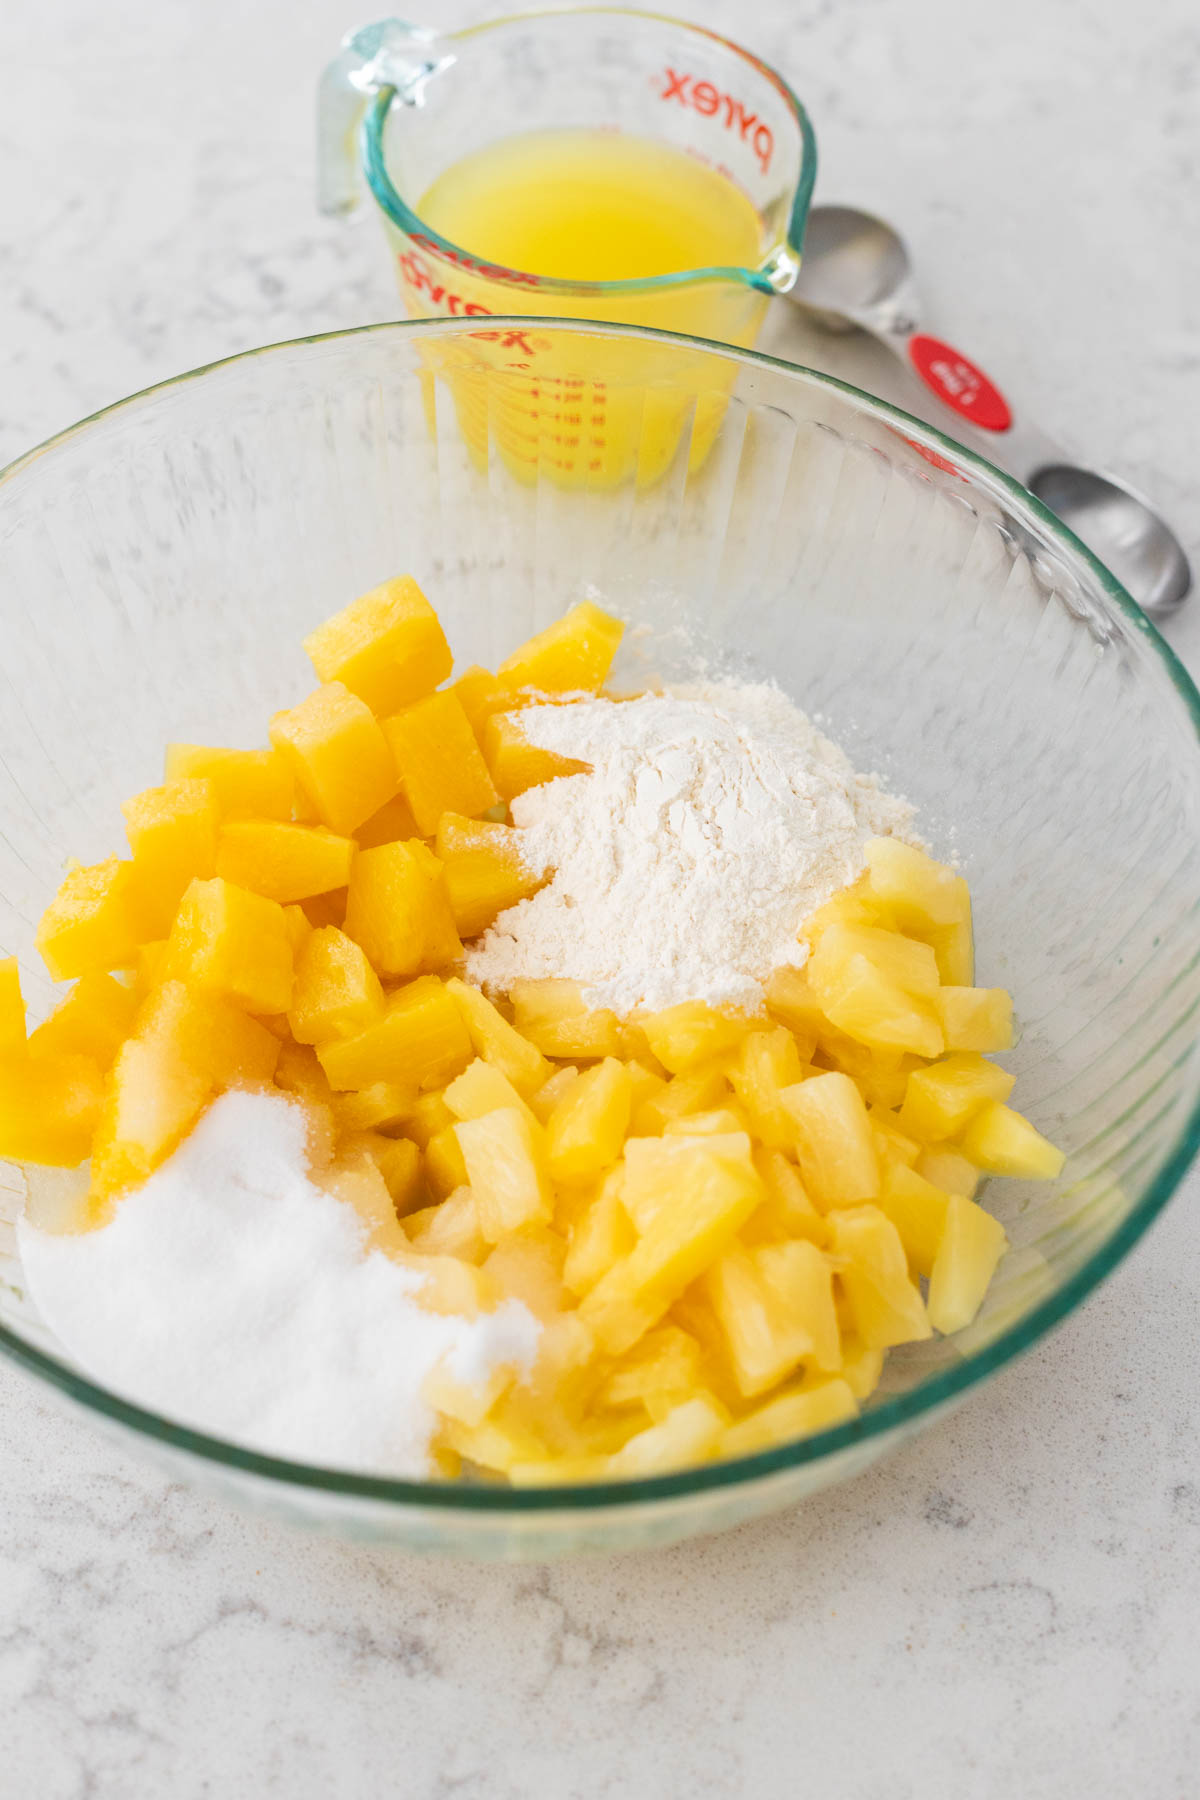 The mixing bowl has pineapple, sugar, and flour. A measuring cup of pineapple juice is in the back.